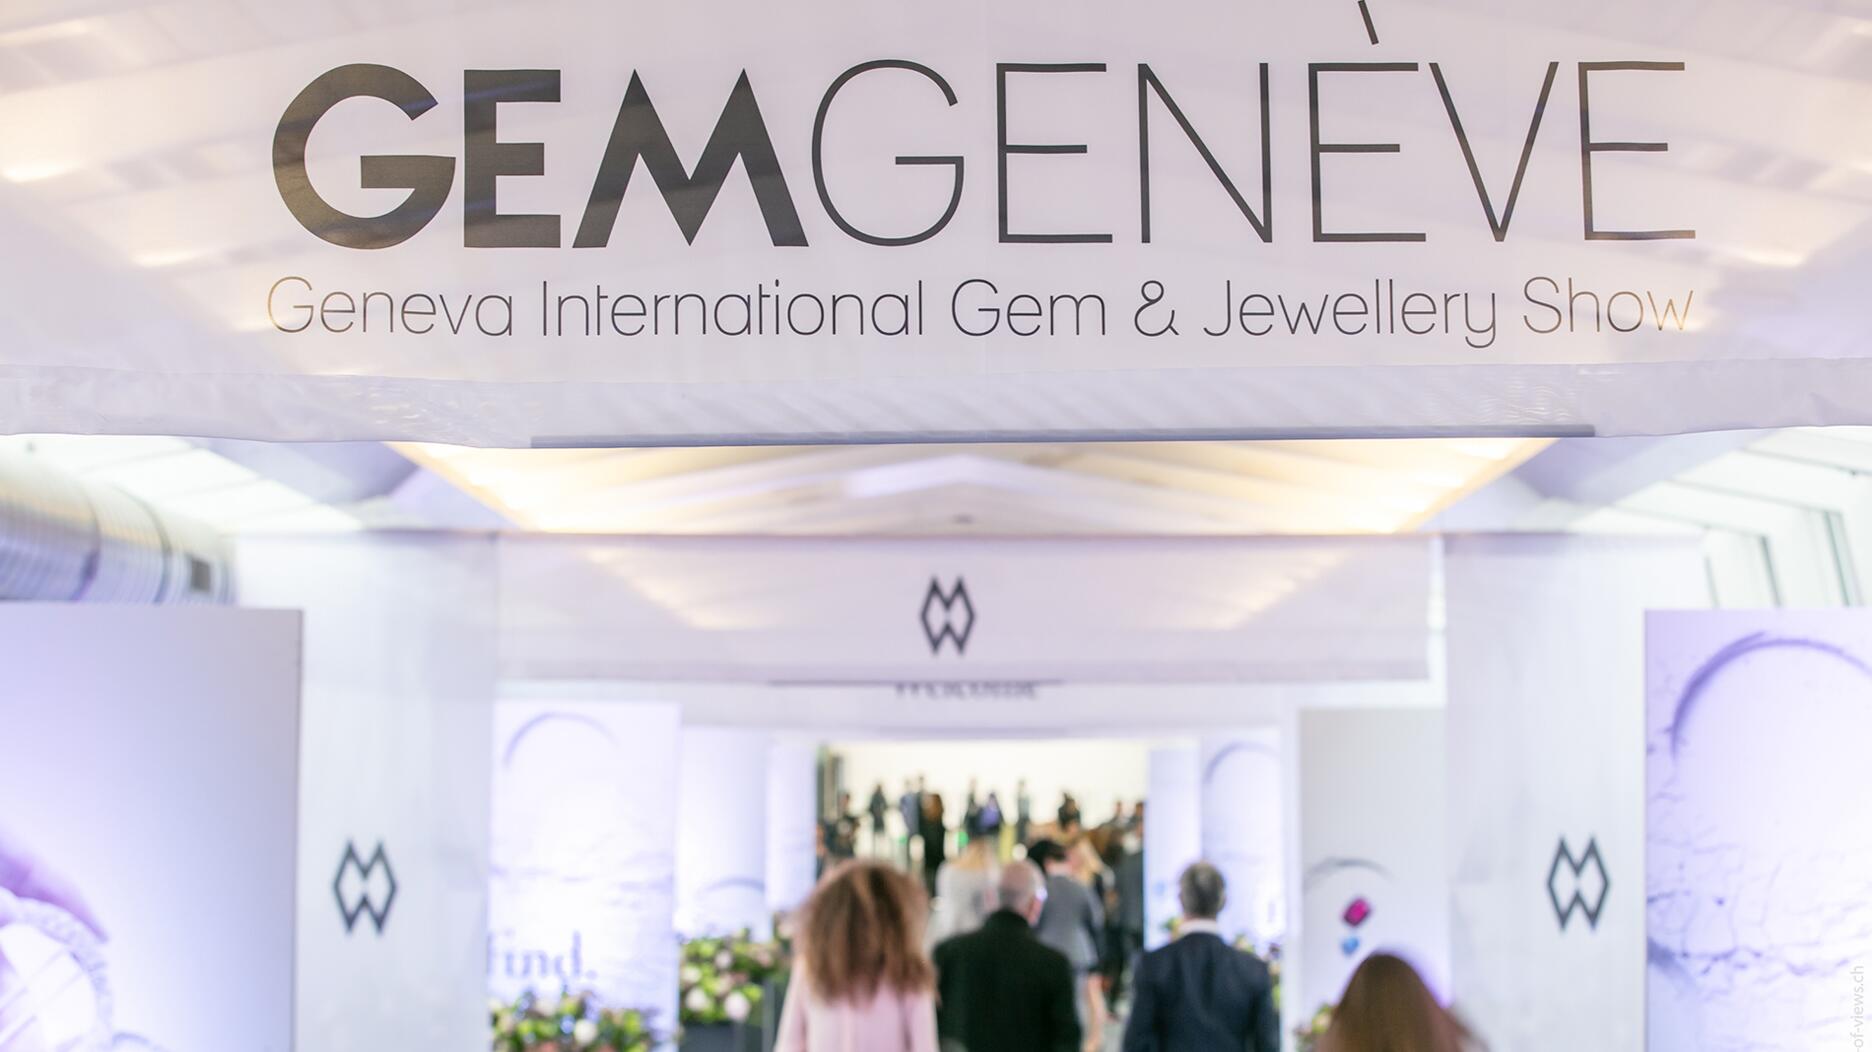 Next Edition of GemGenève Show Scheduled for November